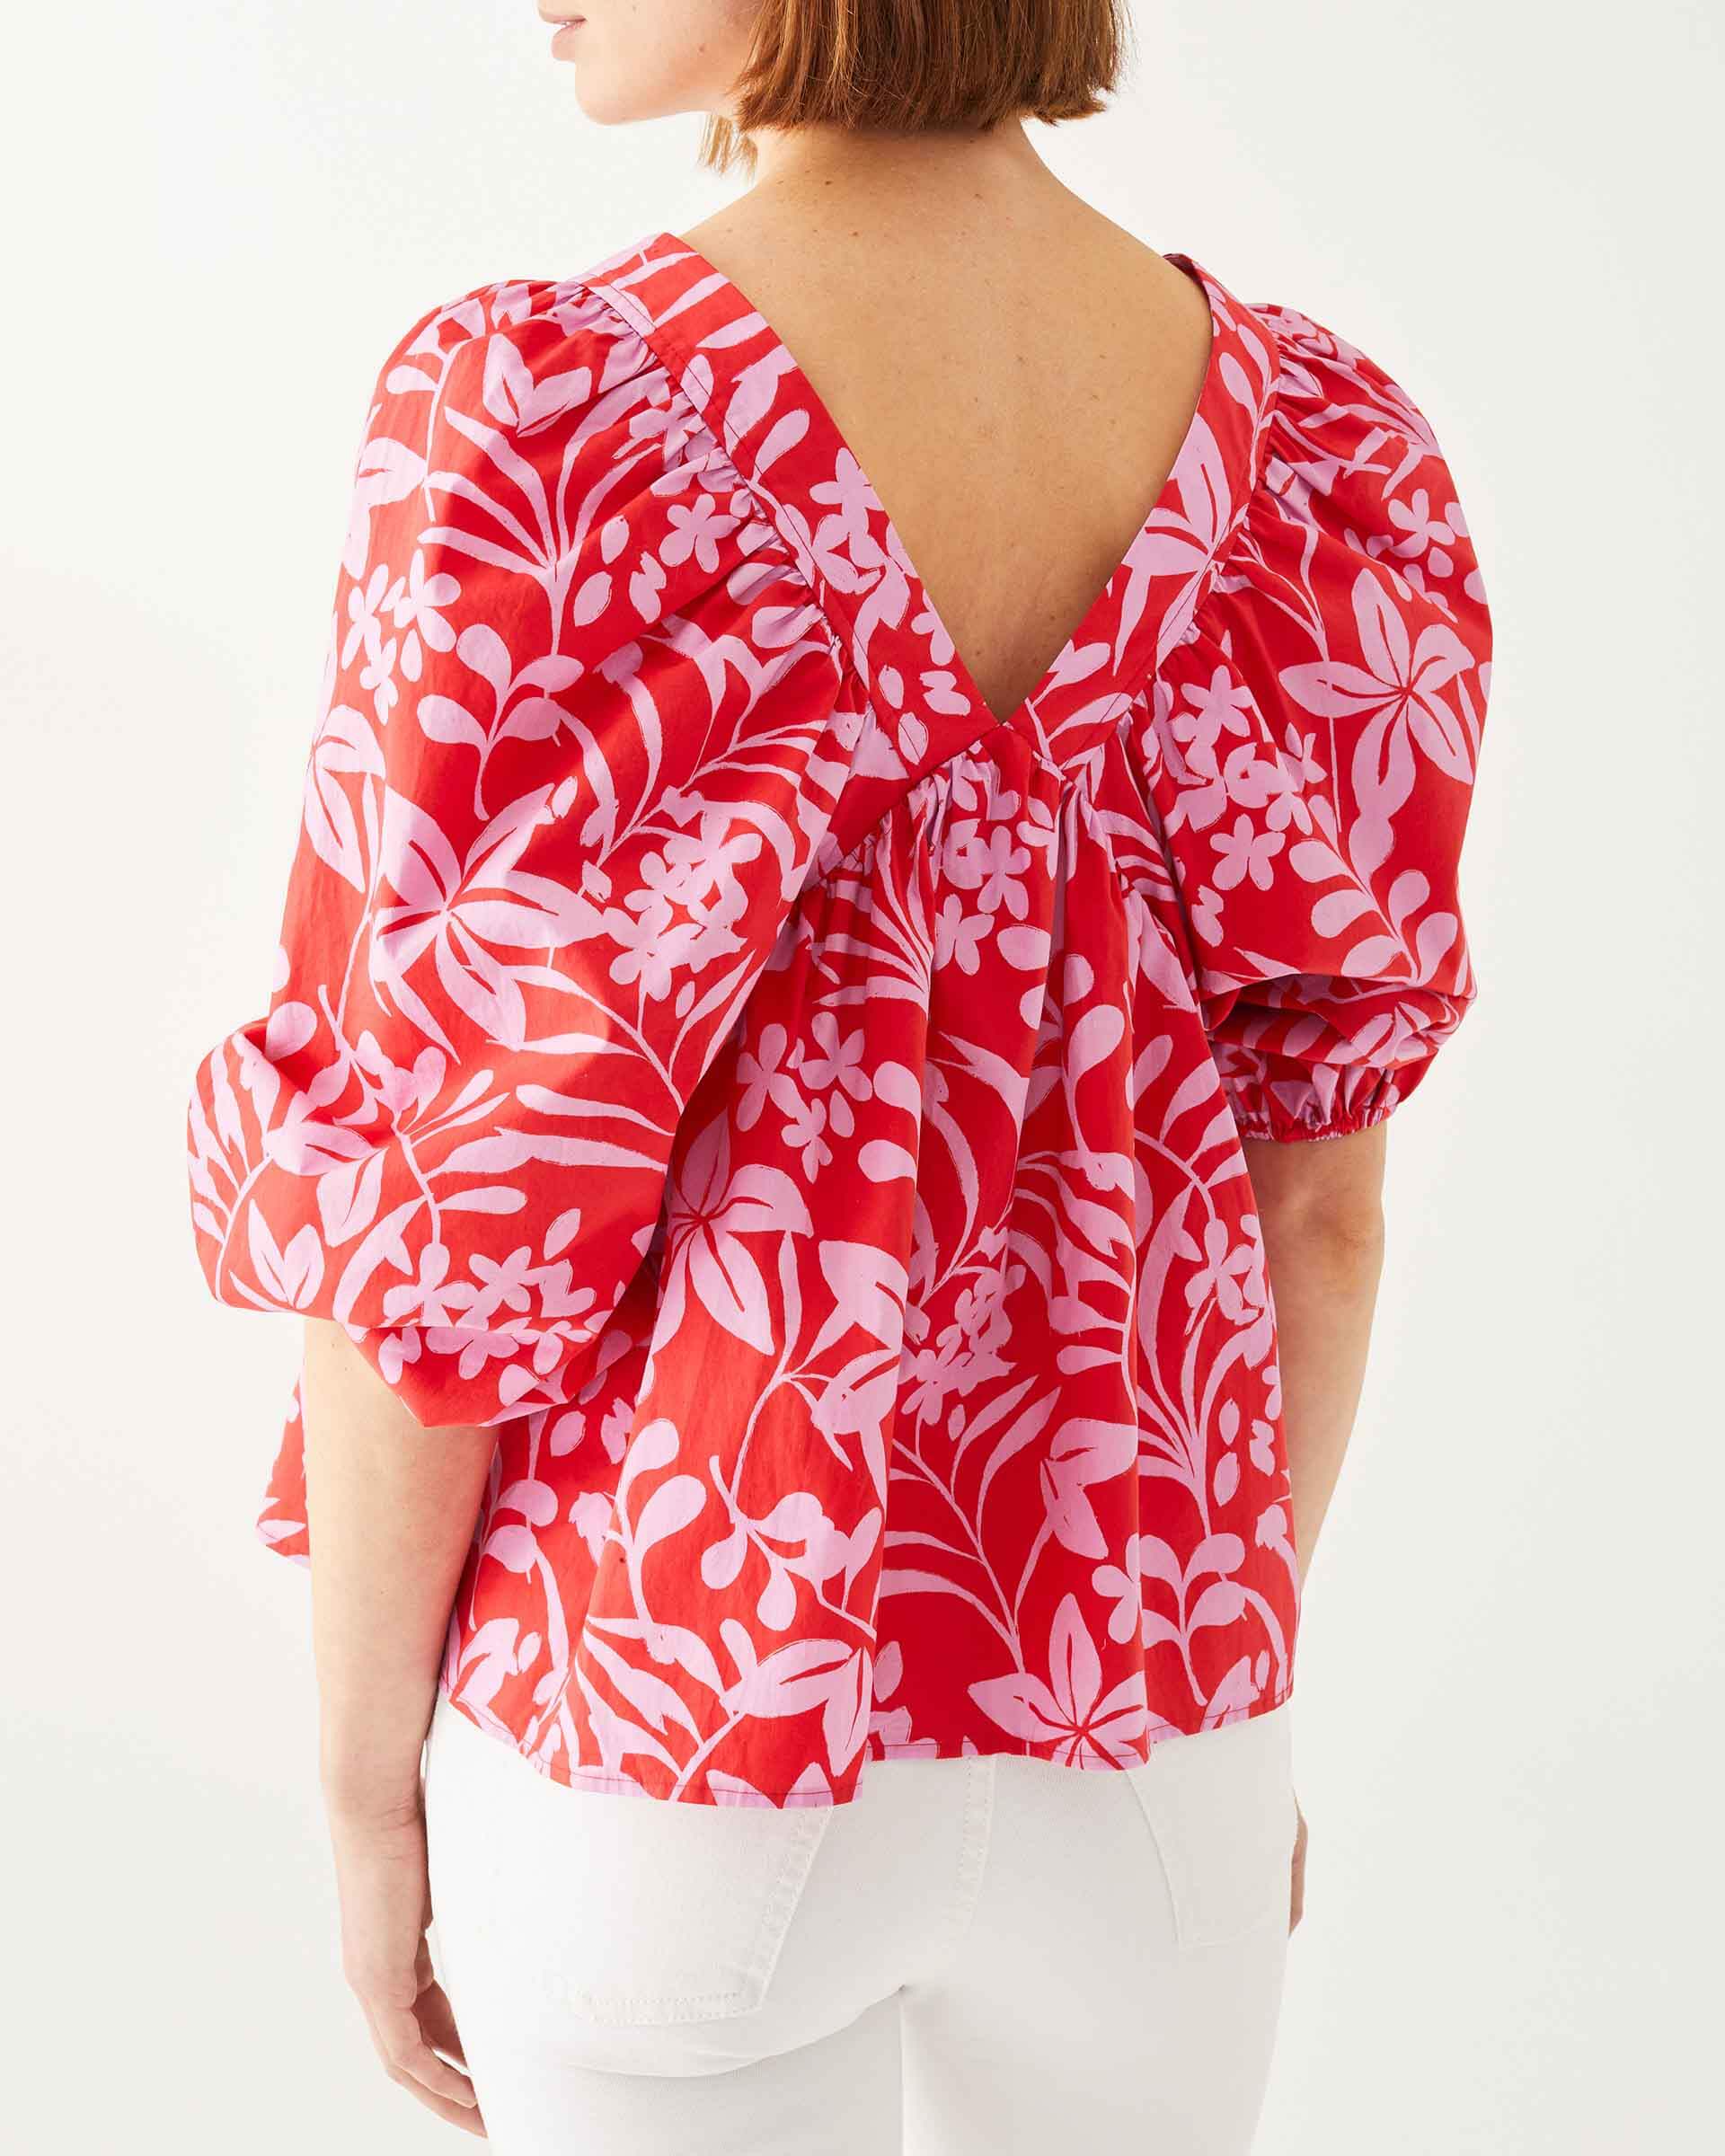 back close up of female wearing red top with pink floral print puff sleeves on white background